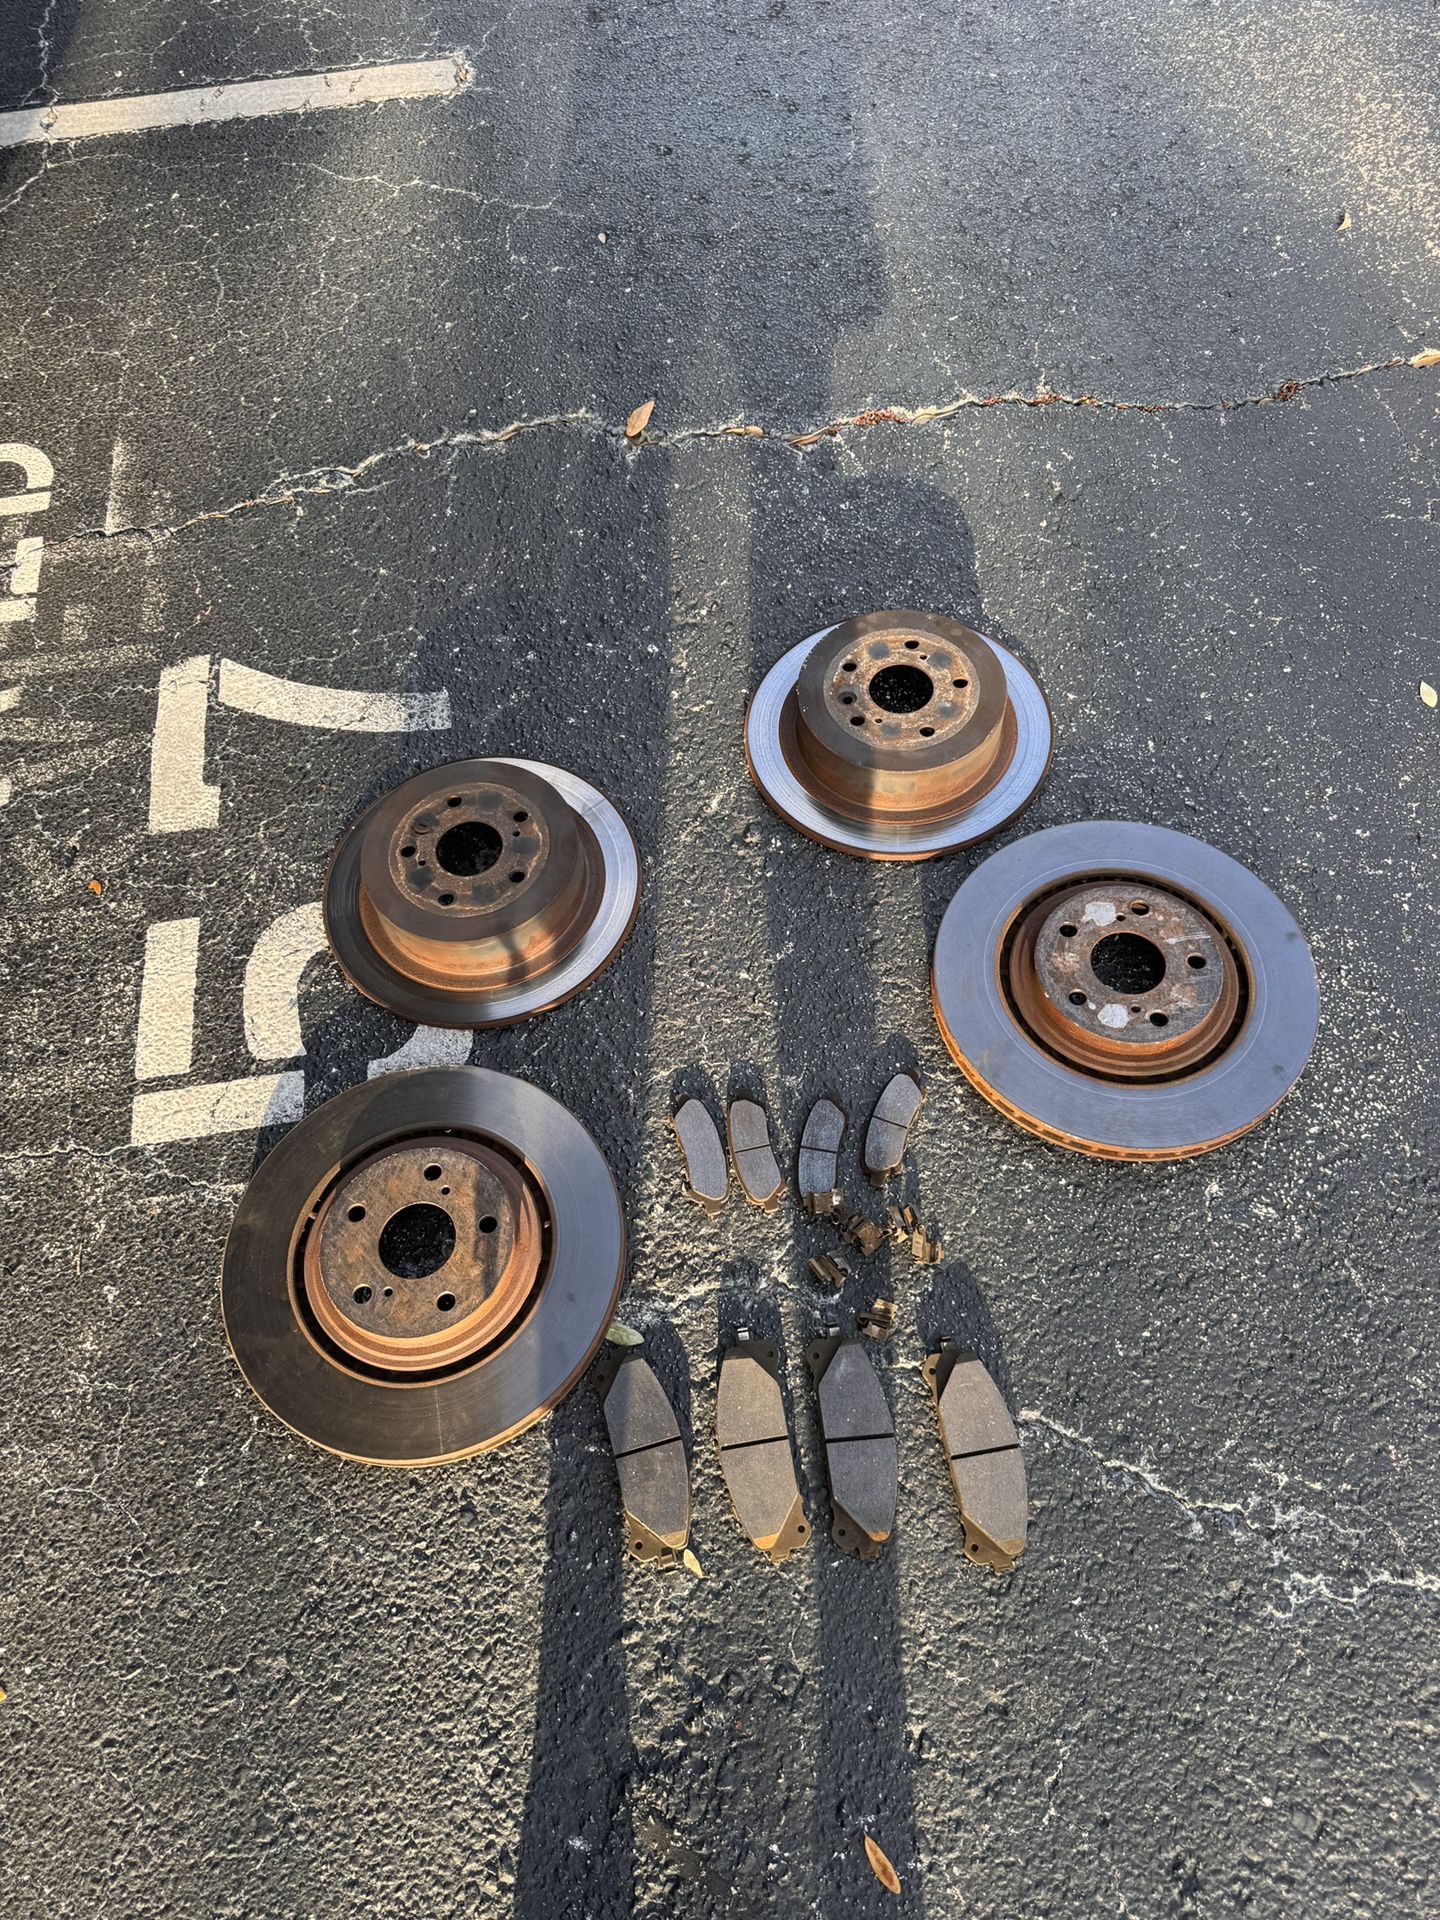 Rotors For Sale